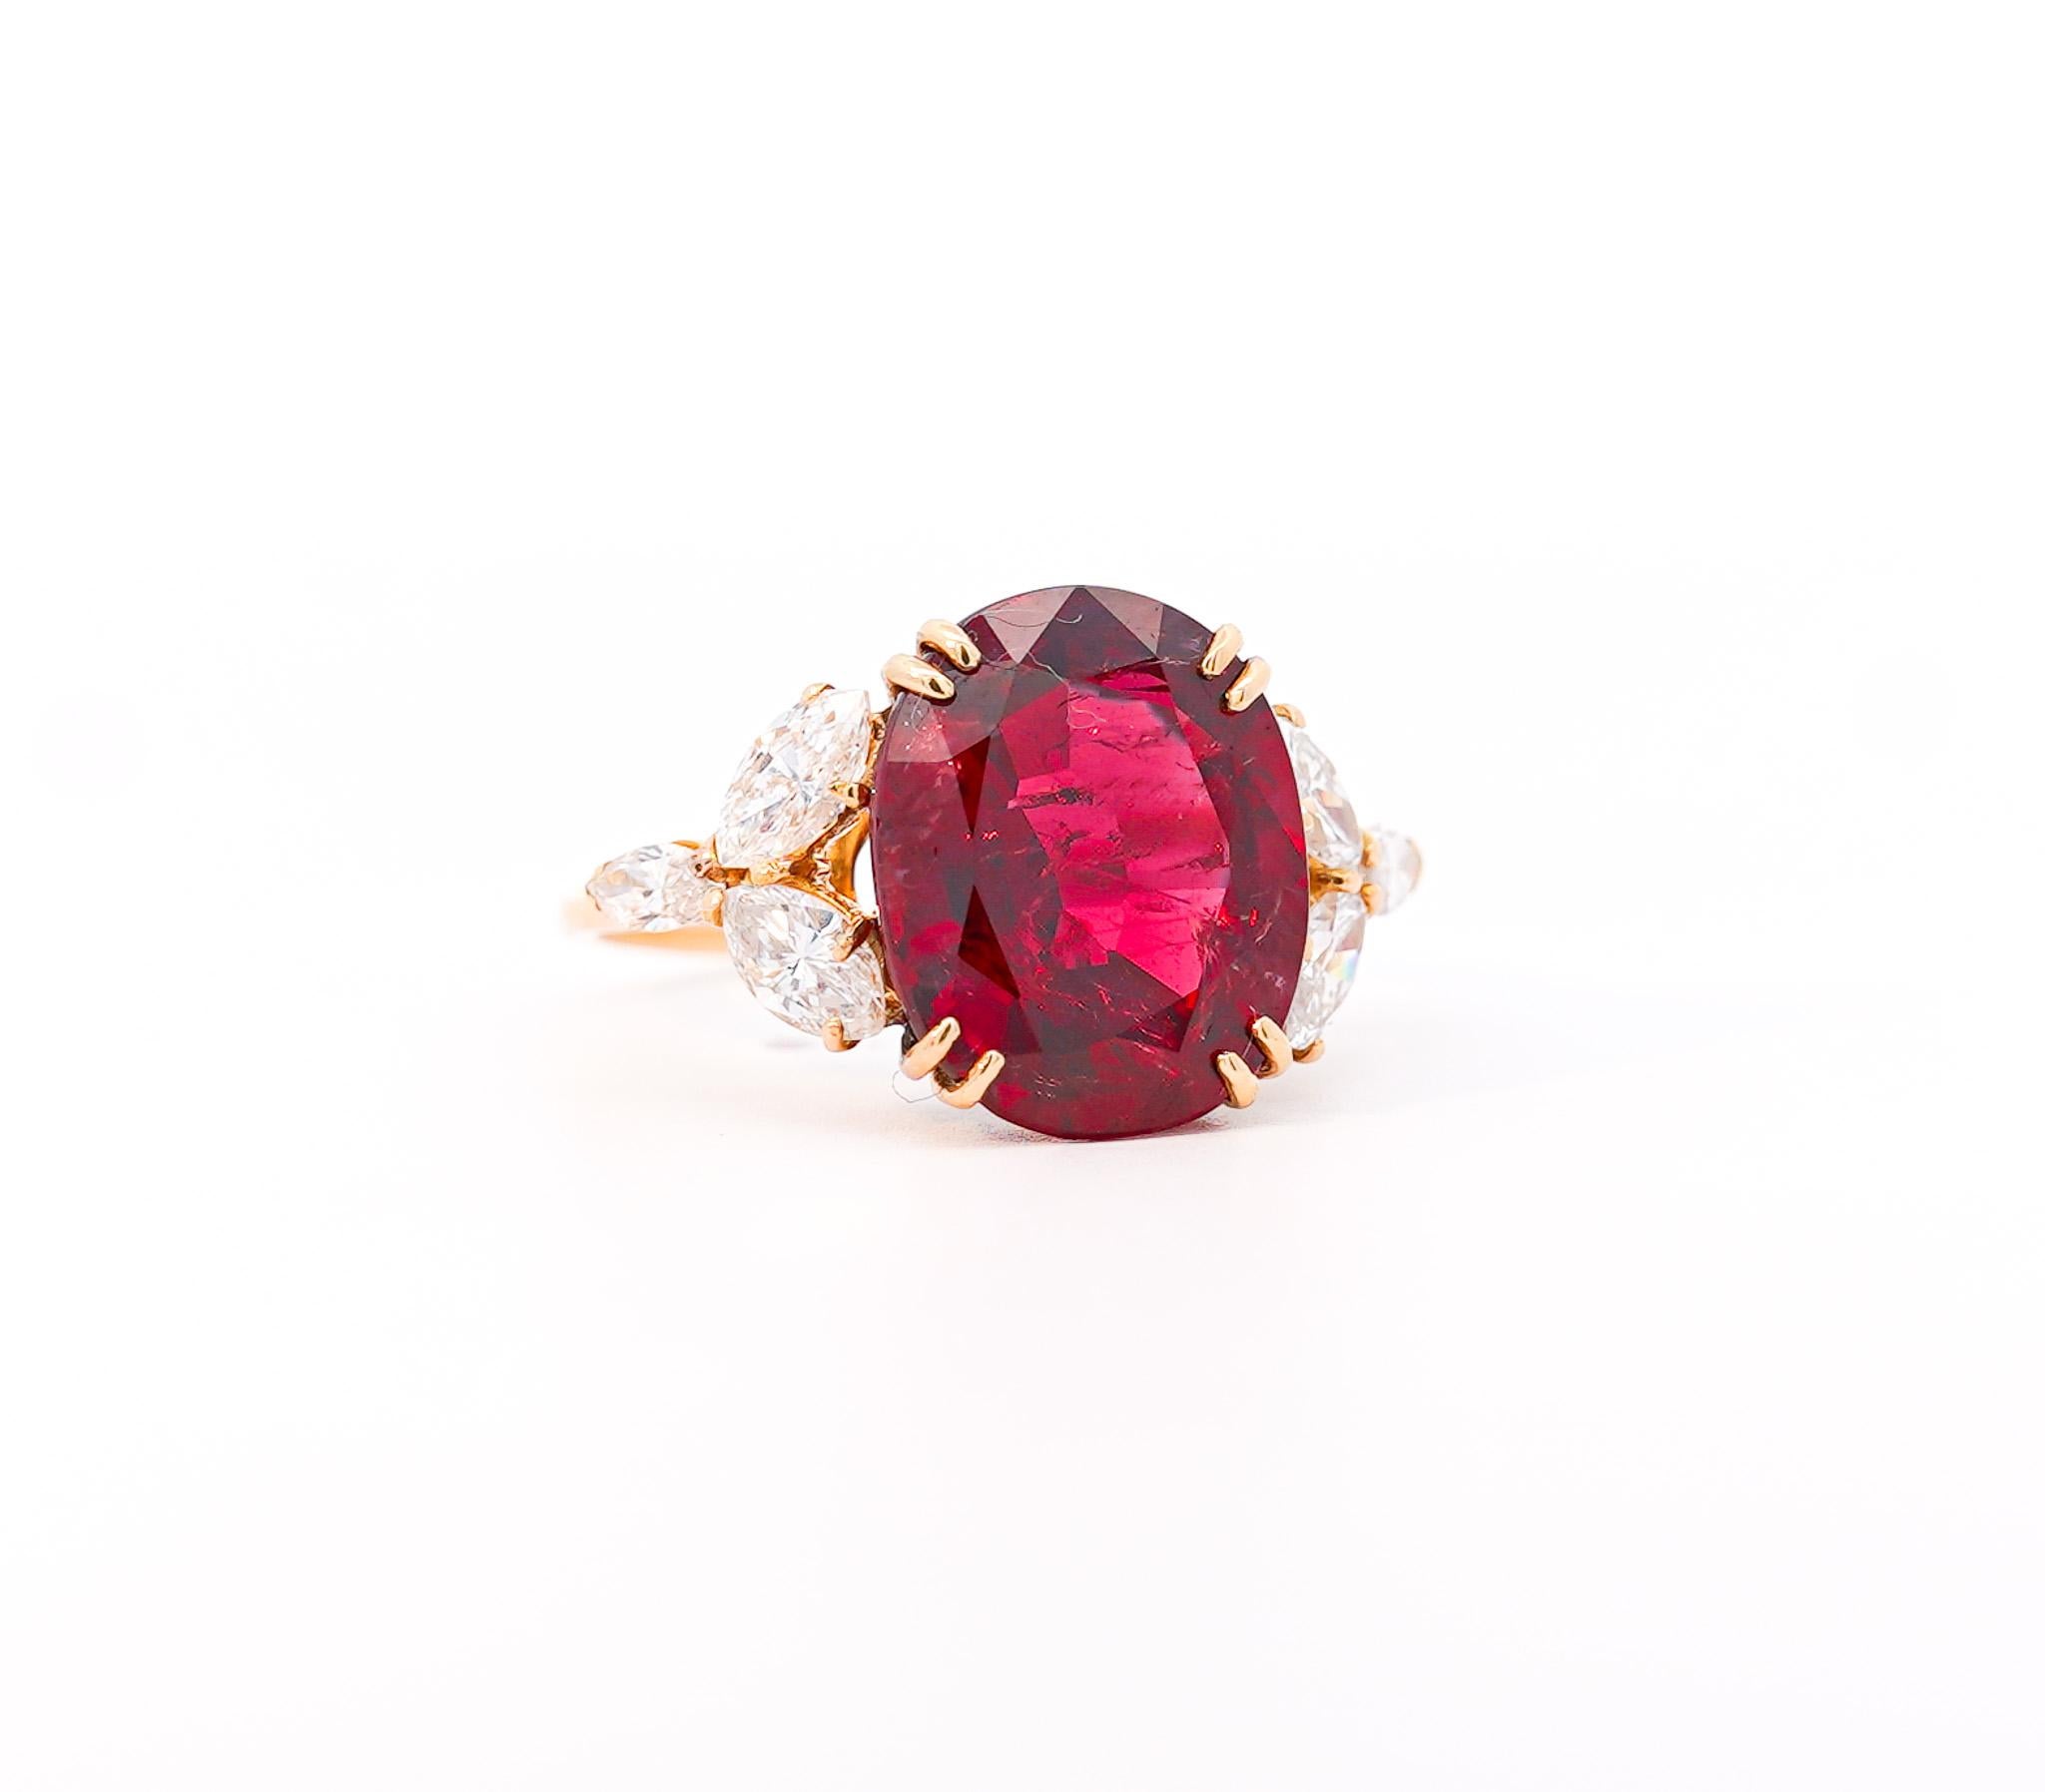 From the famed house of Van Cleef and Arpels, this ring centers an 8.85 carat oval-cut unheated Ruby and is flanked by an additional 2.00 carats of marquis-cut diamonds. The ruby is certified by GRS, while the ring is a signed VCA jewel.

The center